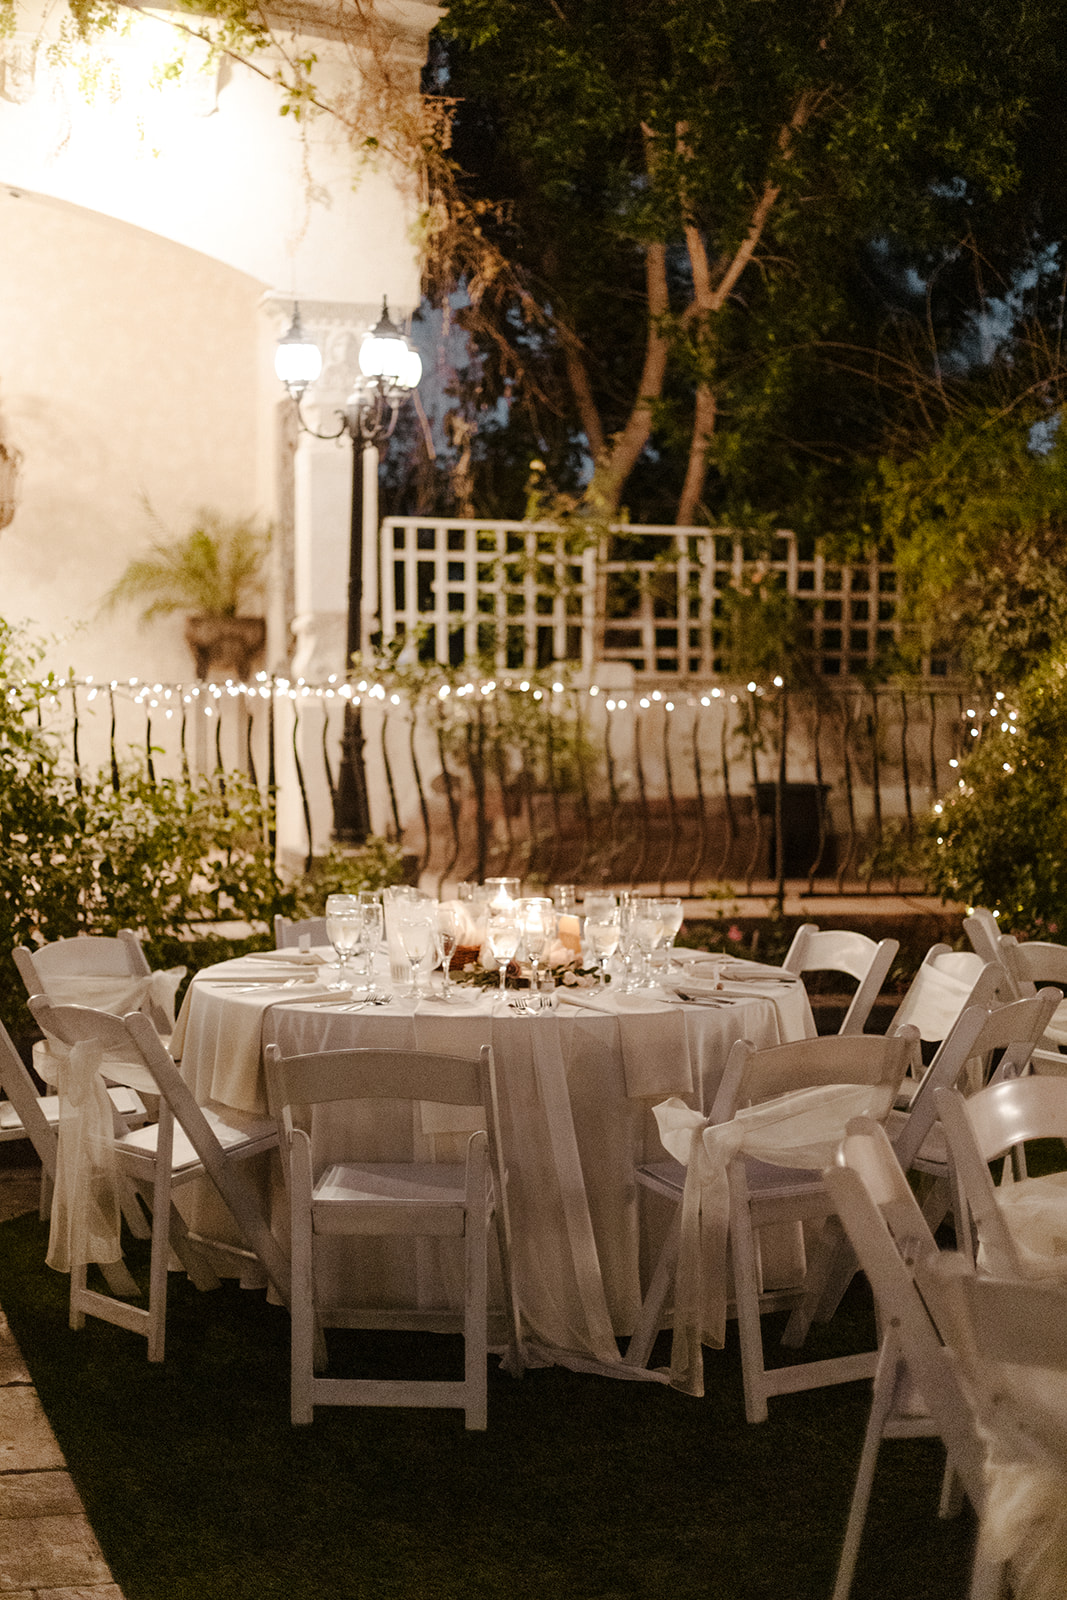 The stunning Wright House Garden Reception Center ready for the dreamy Arizona wedding day! 